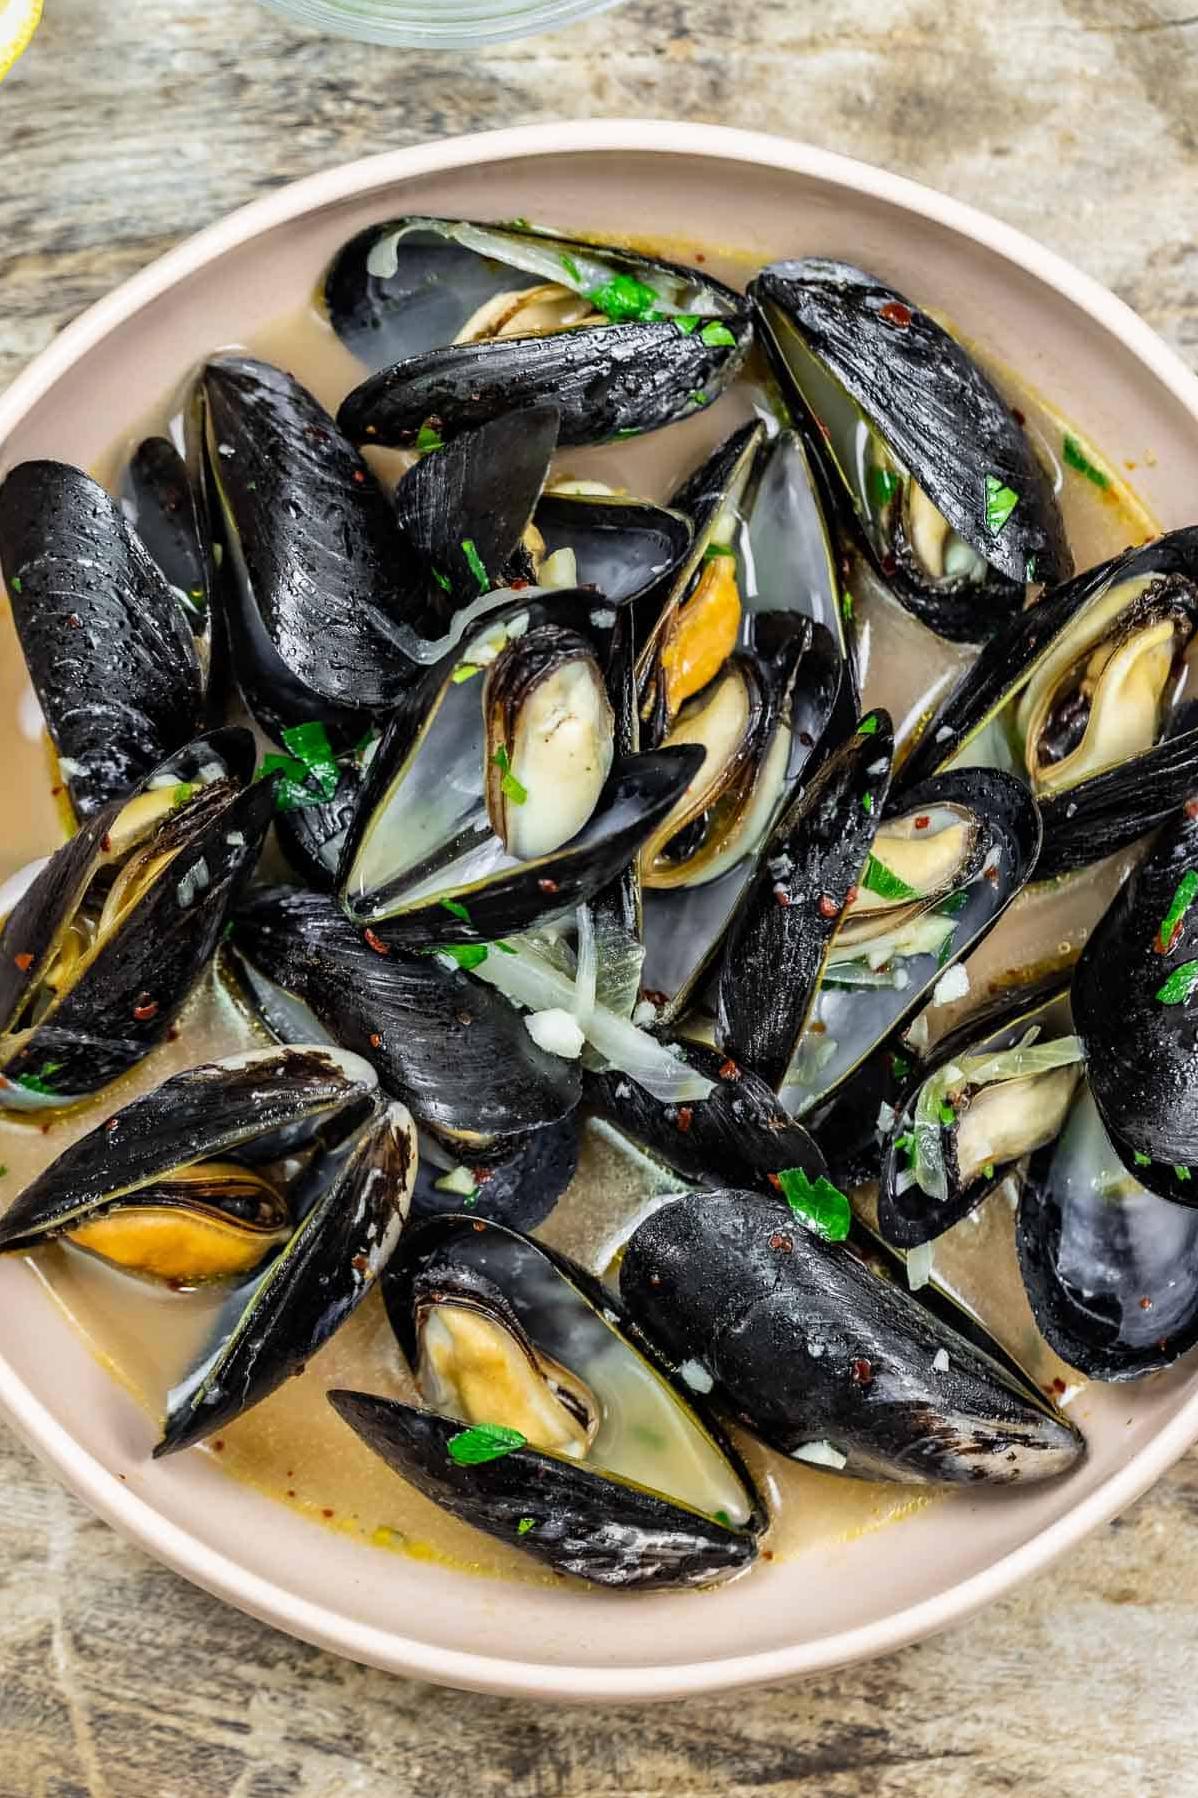  Dive into this delicious bowl of steamed mussels in white wine!